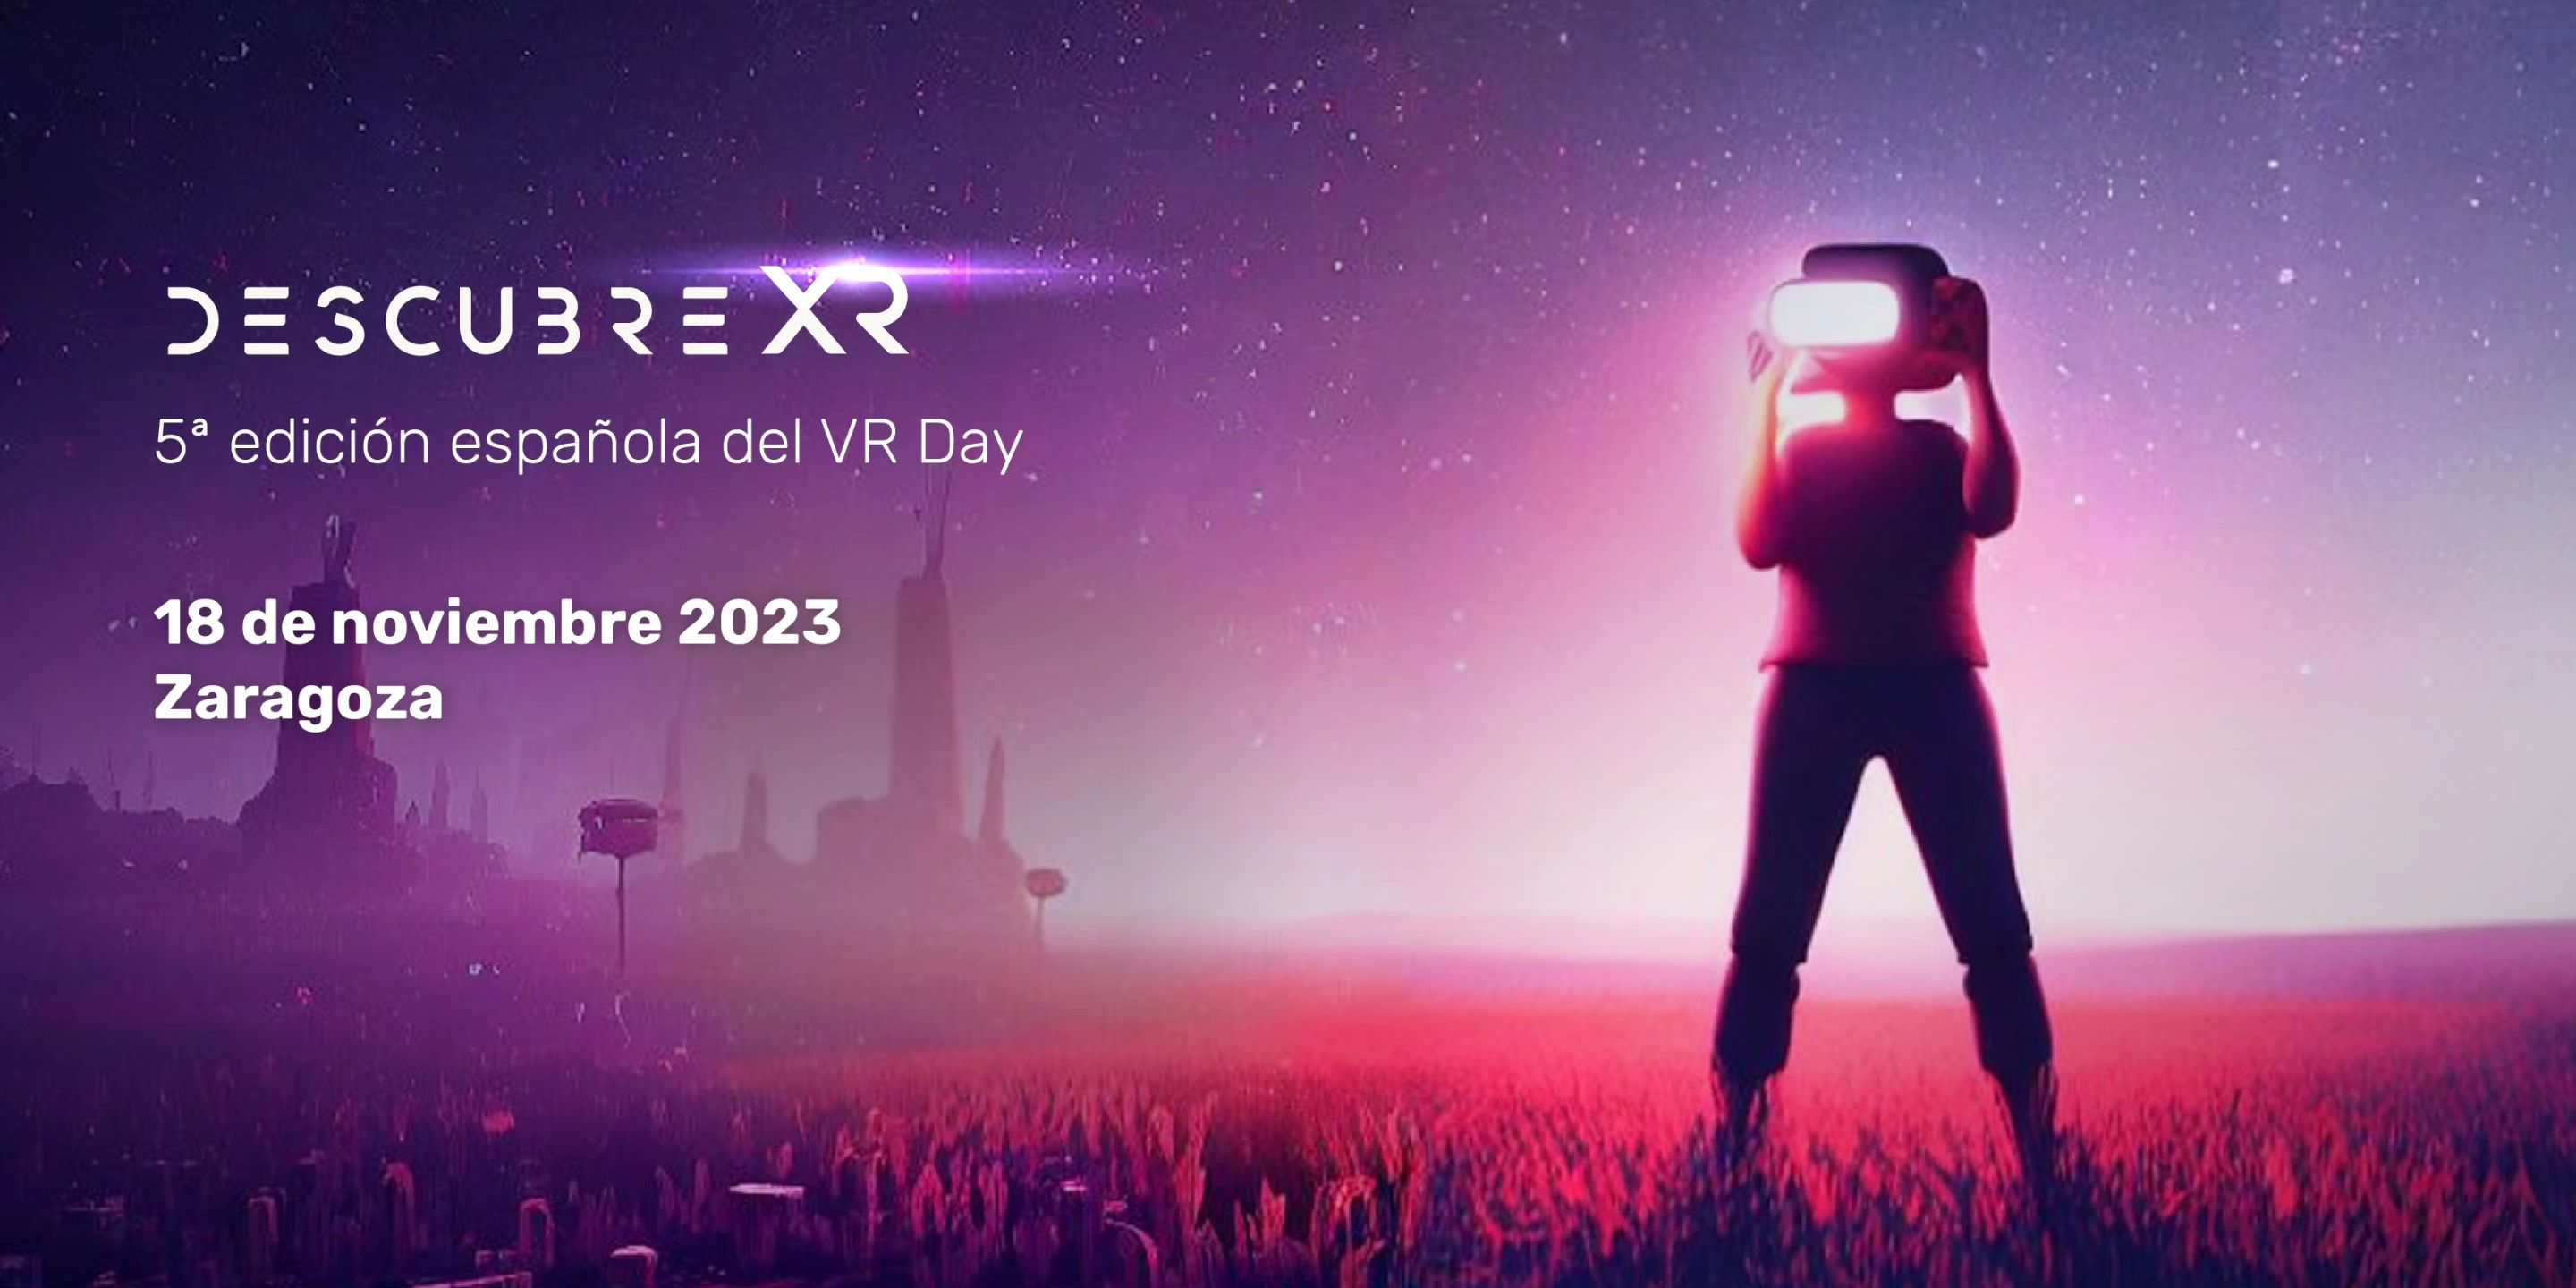 Poster of DescubreXR, the fifth edition of VR Day Spain